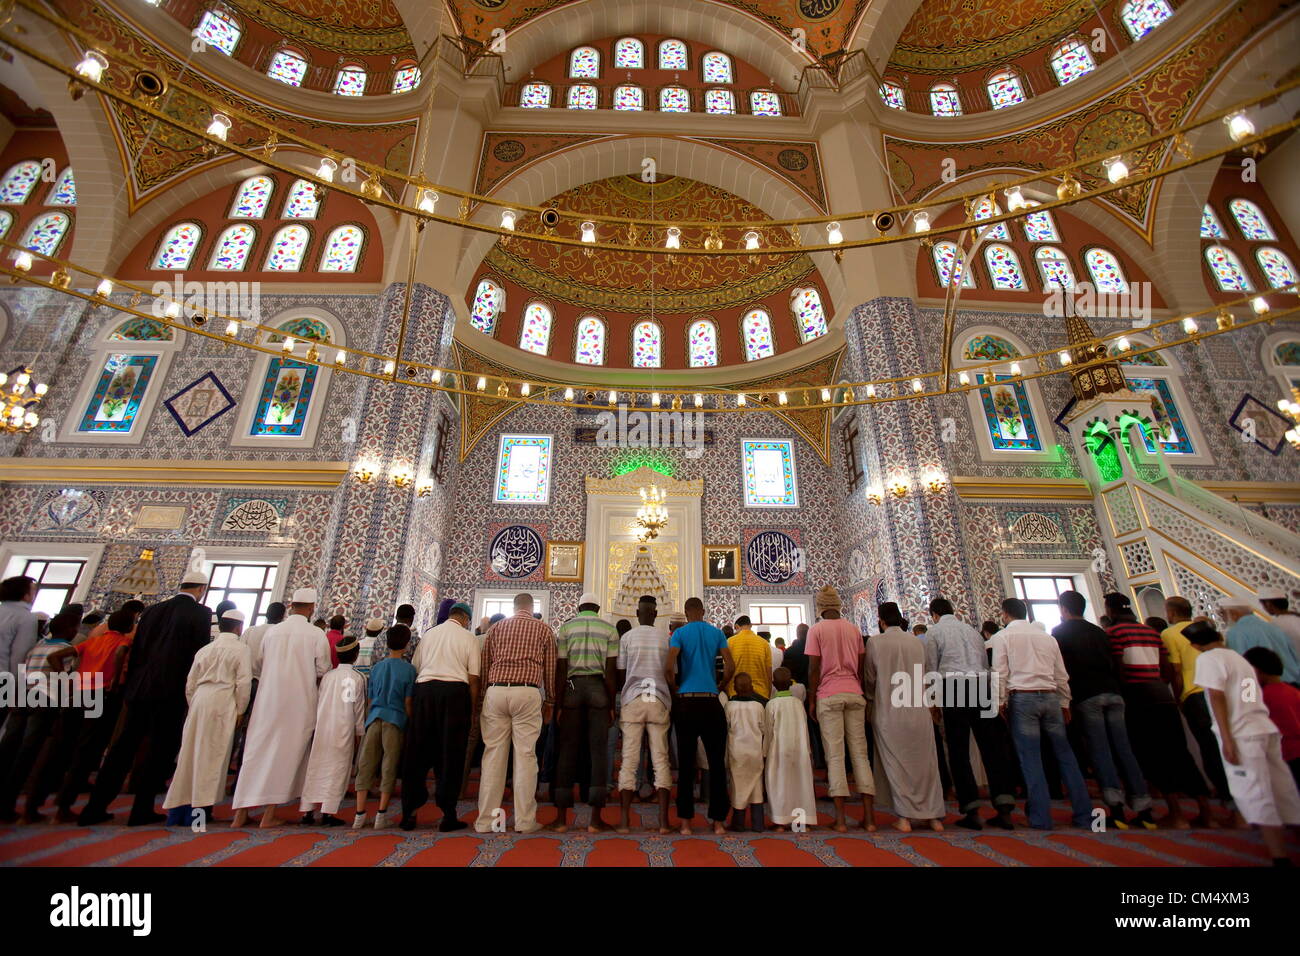 MIDRAND, SOUTH AFRICA: Men attend prayers at the Turkish Mosque in the Nizamiye Complex on October 4, 2012 in Midrand, South Africa. The Complex was officially opened by President Jacob Zuma and it contains the largest Turkish Mosque in the Southern Hemisphere. (Photo by Gallo Images / The Times / Daniel Born) Stock Photo